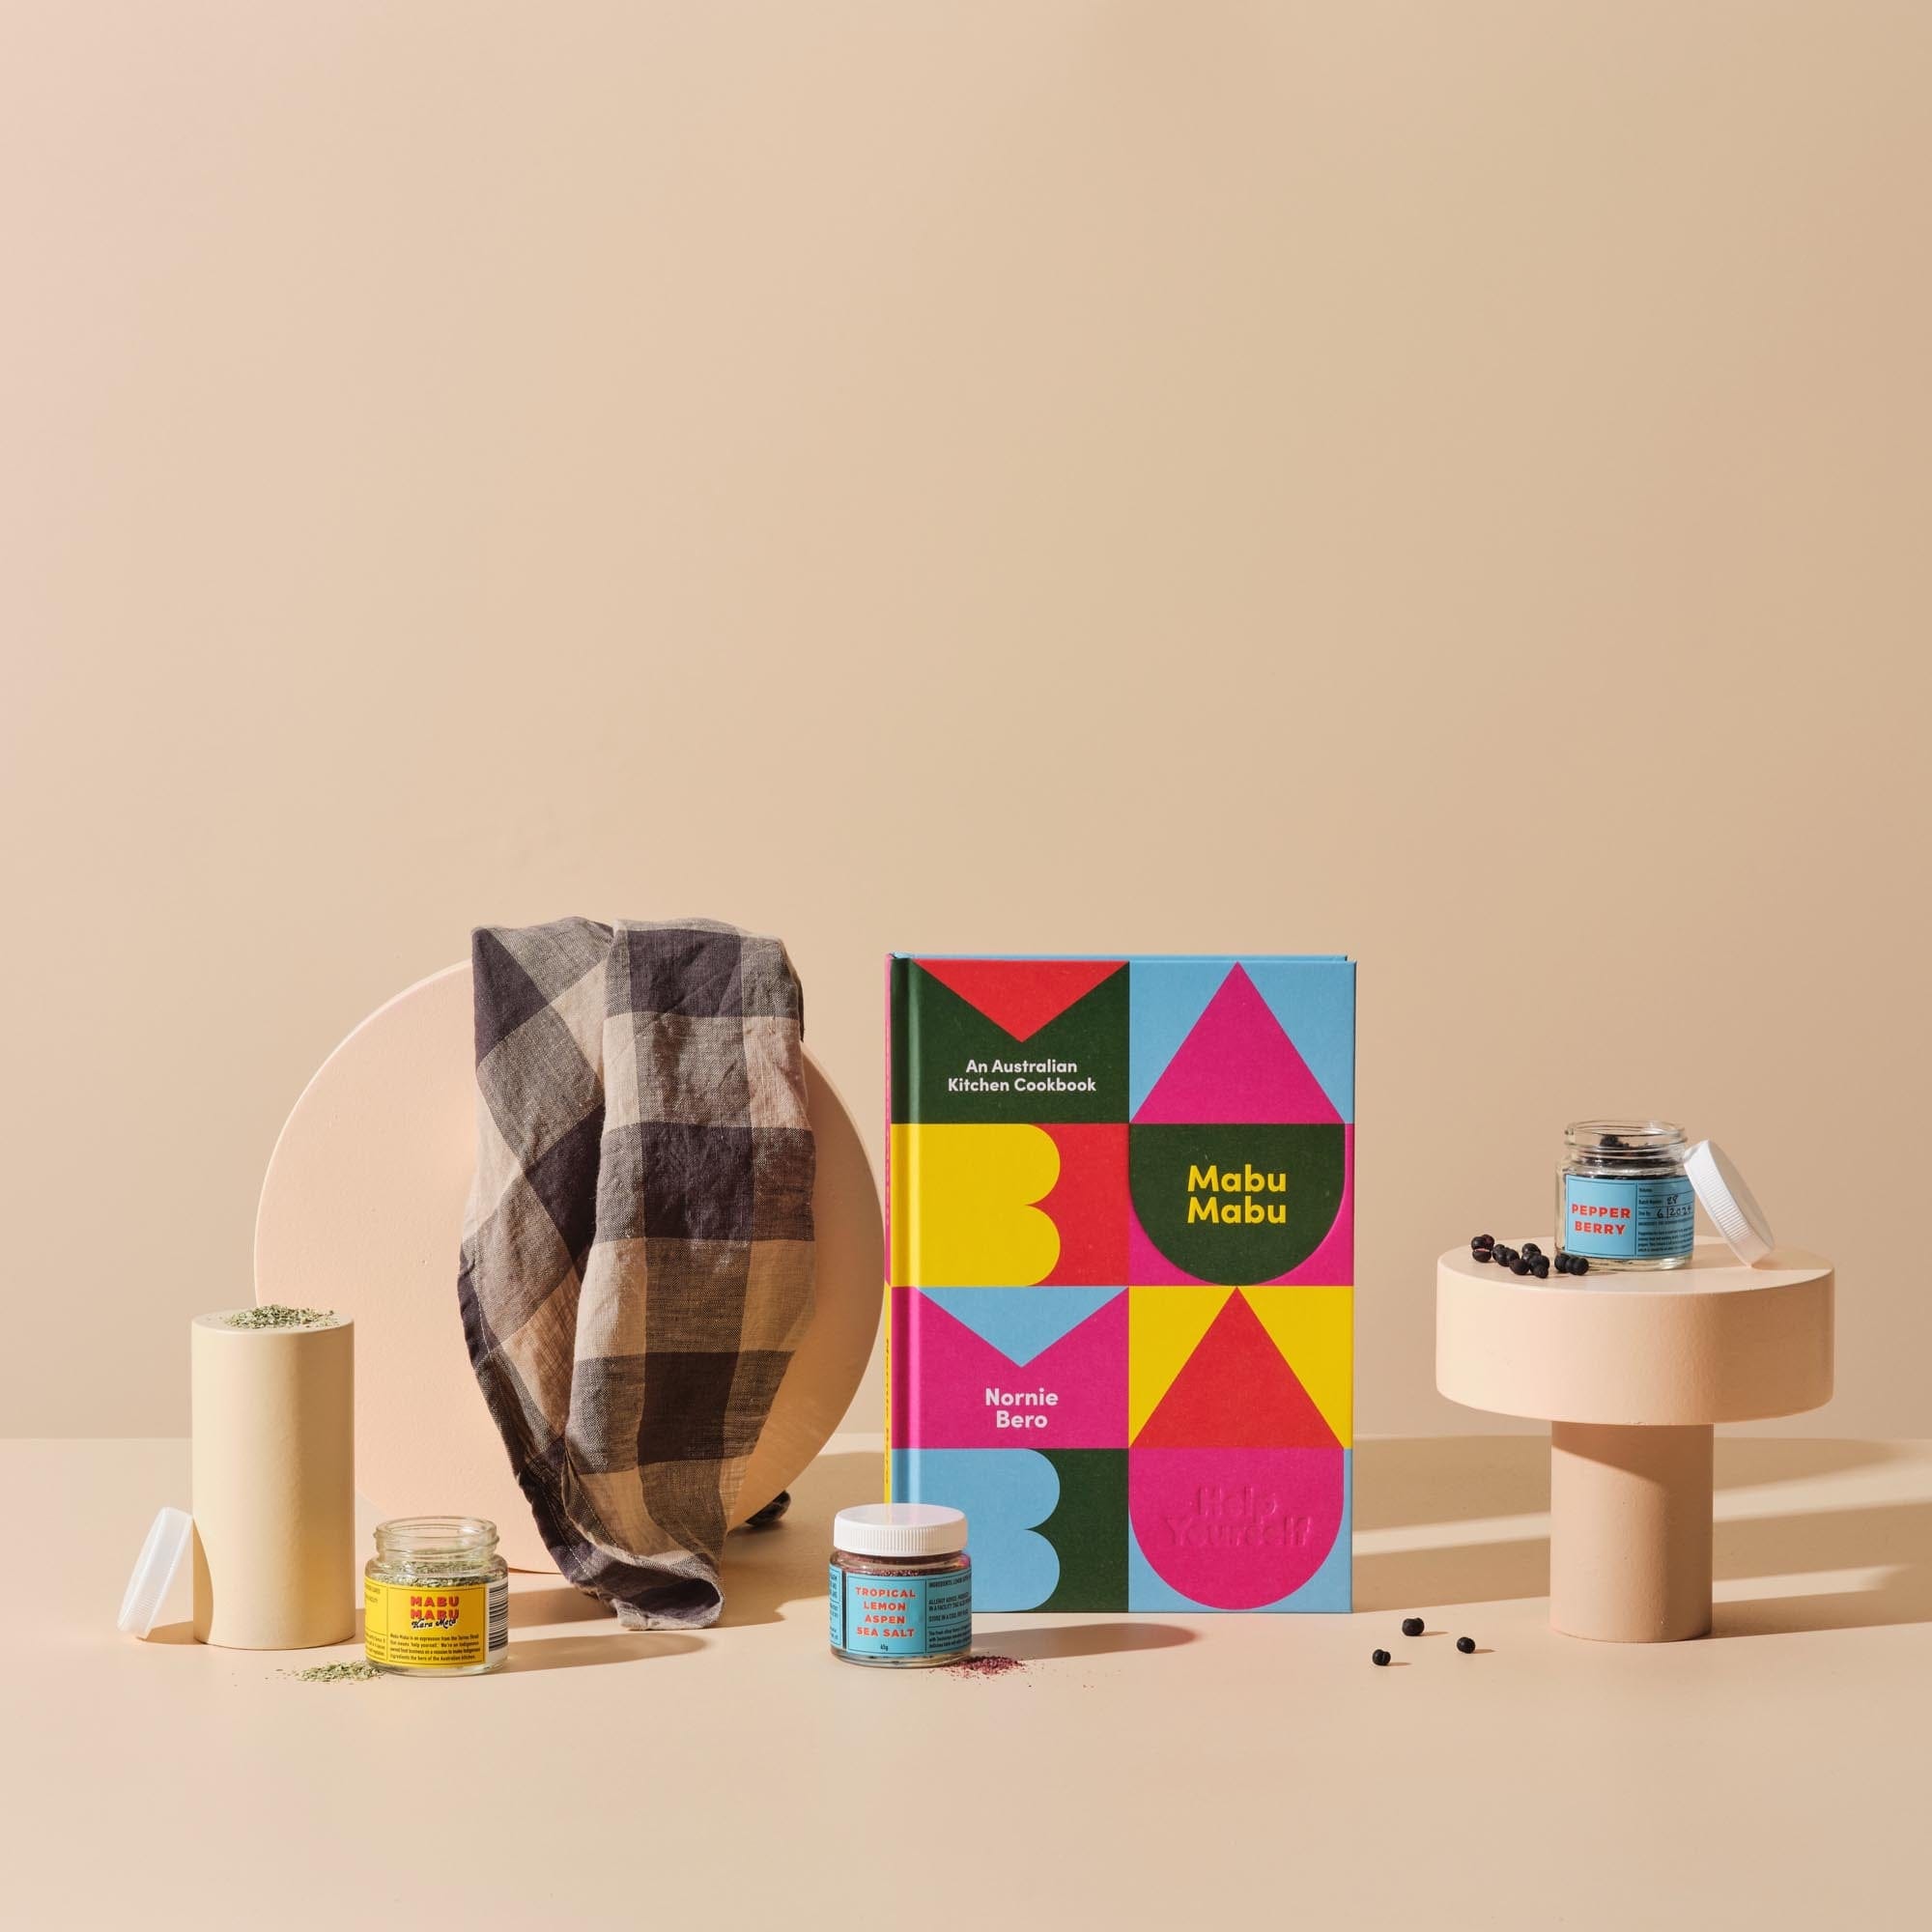 This image features Handsel’s gifting bundle ‘The Native Plate’ that includes: the cover of Mabu Mabu, selection of indigenous spices and Carlotta and Gee’s Linen Tea Towel.